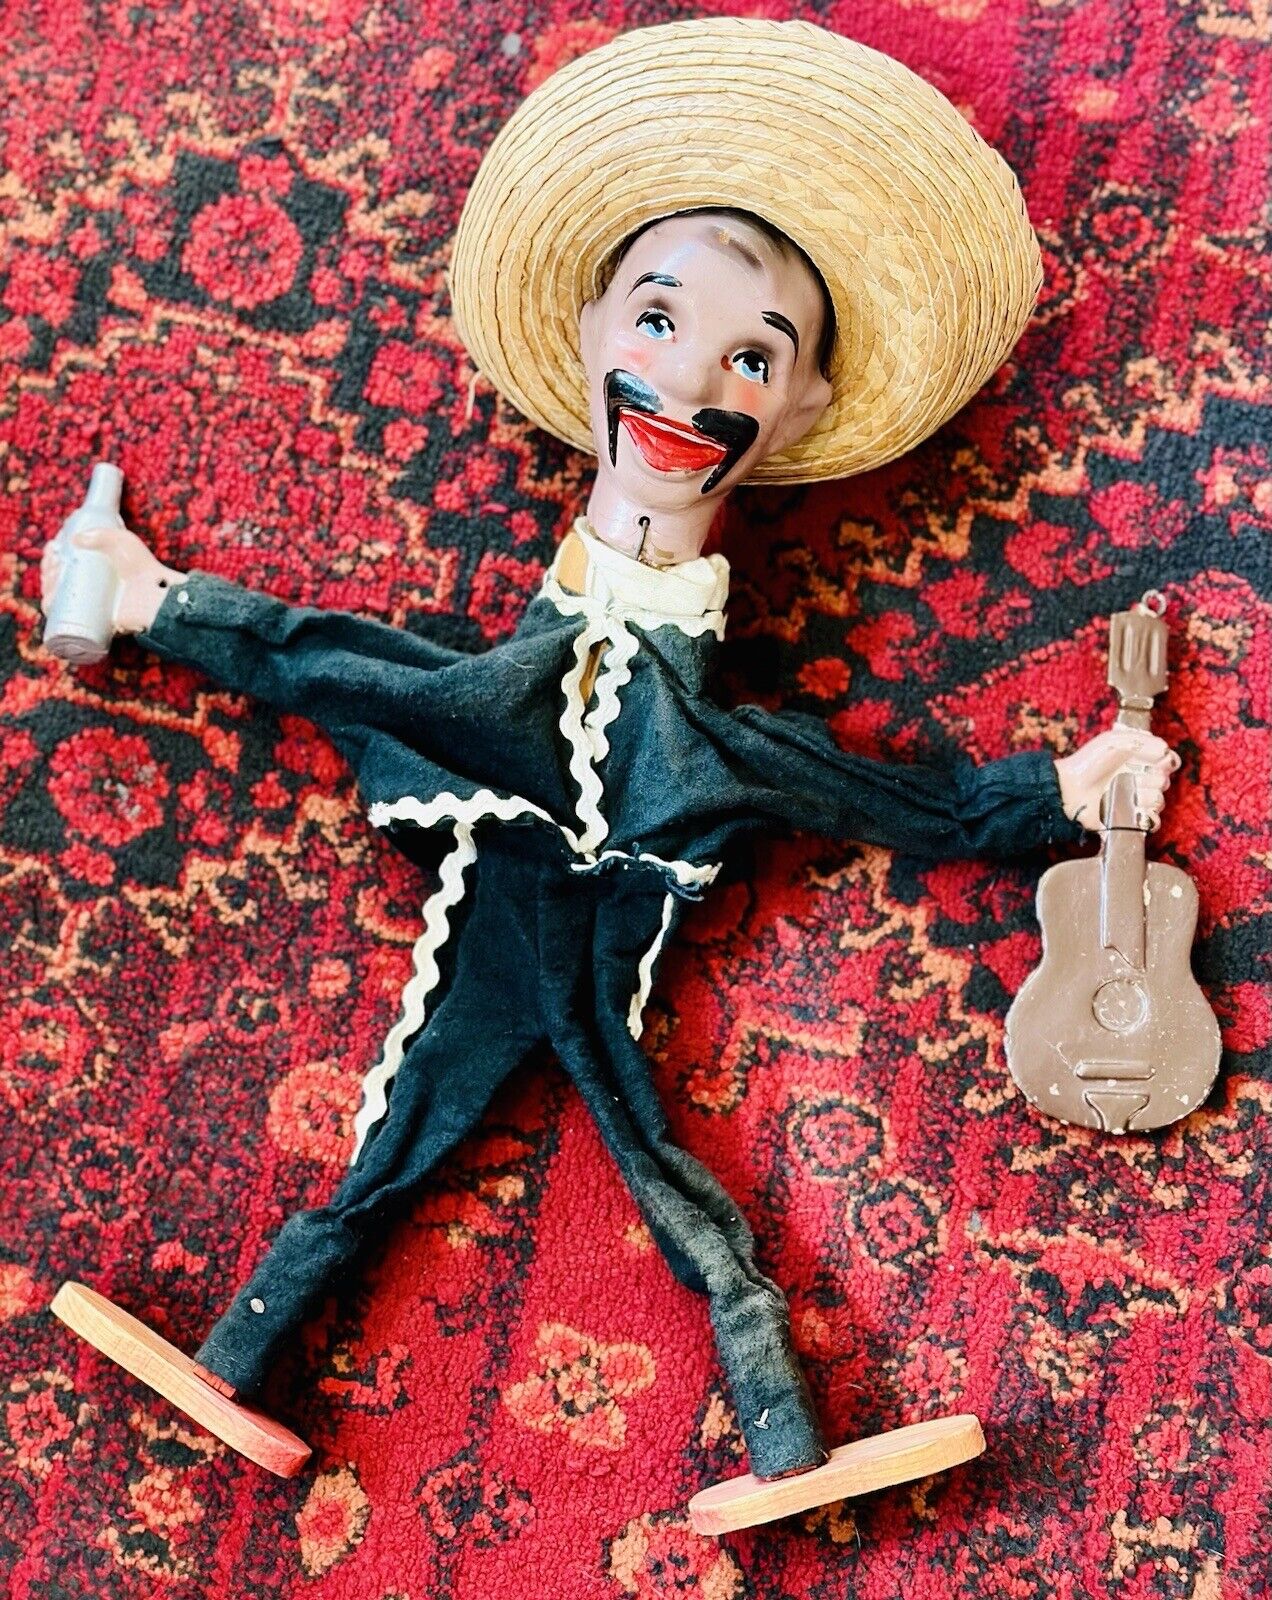 Mariachi stringless vintage marionette possibly haunted Mexican sombrero 60-70s